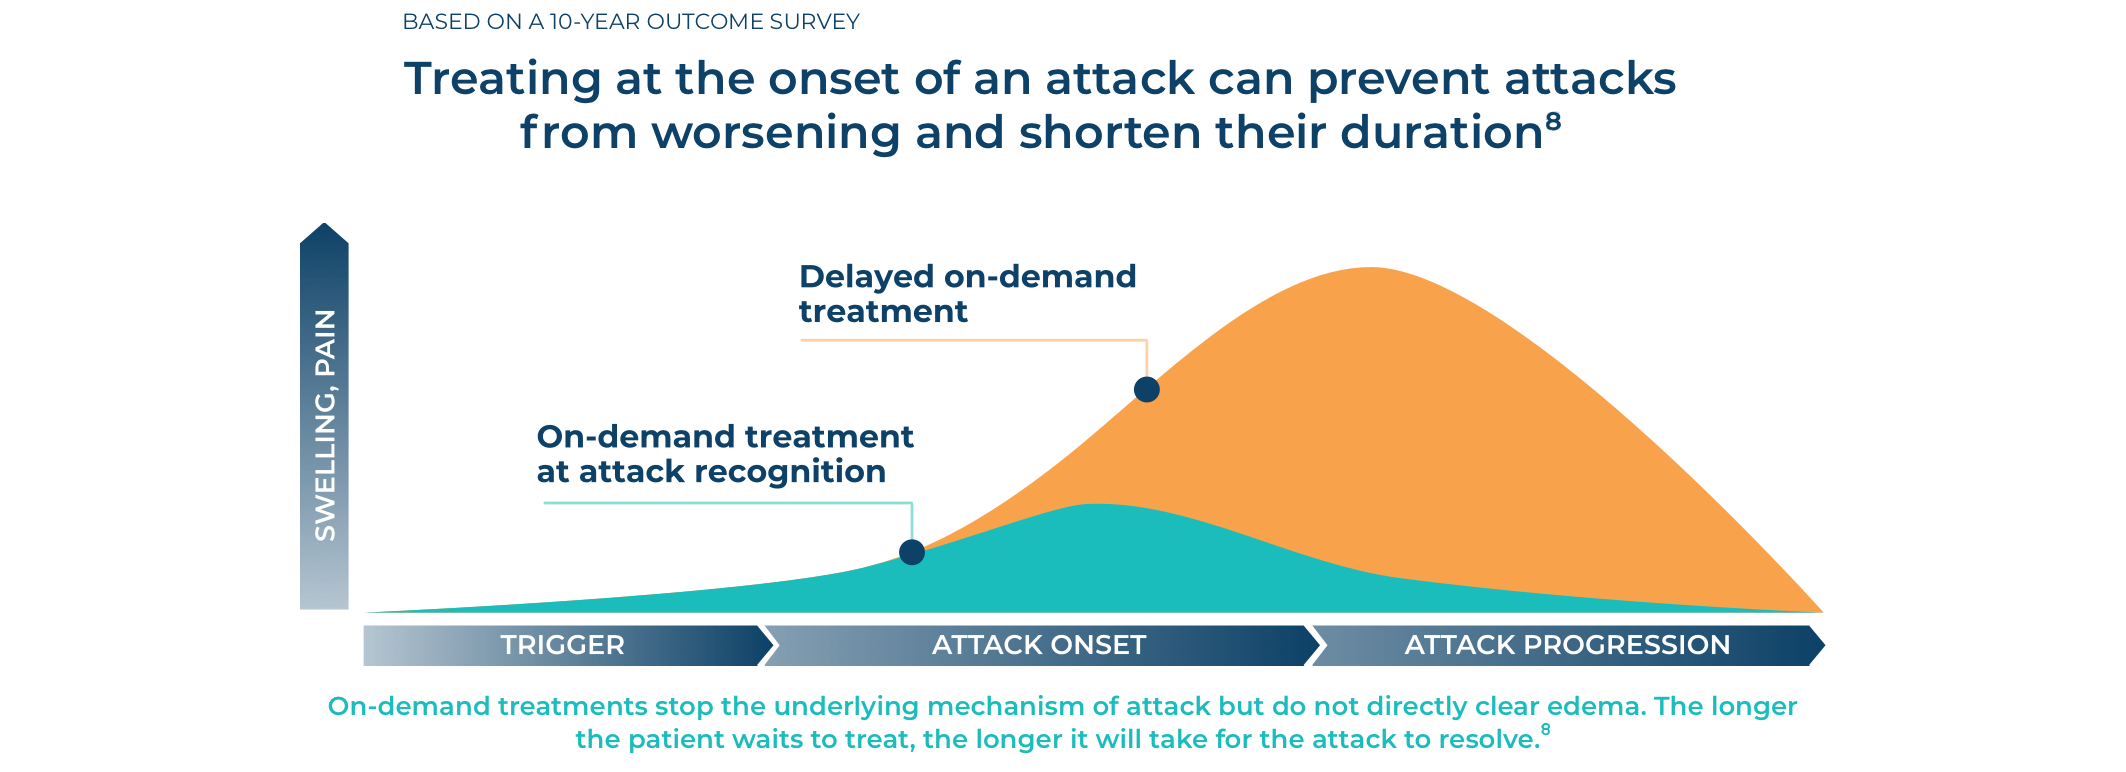 Infographic of a 10-year outcome survey highlighting how treating at the onset of an attack can prevent attacks from worsening and shorten their duration.